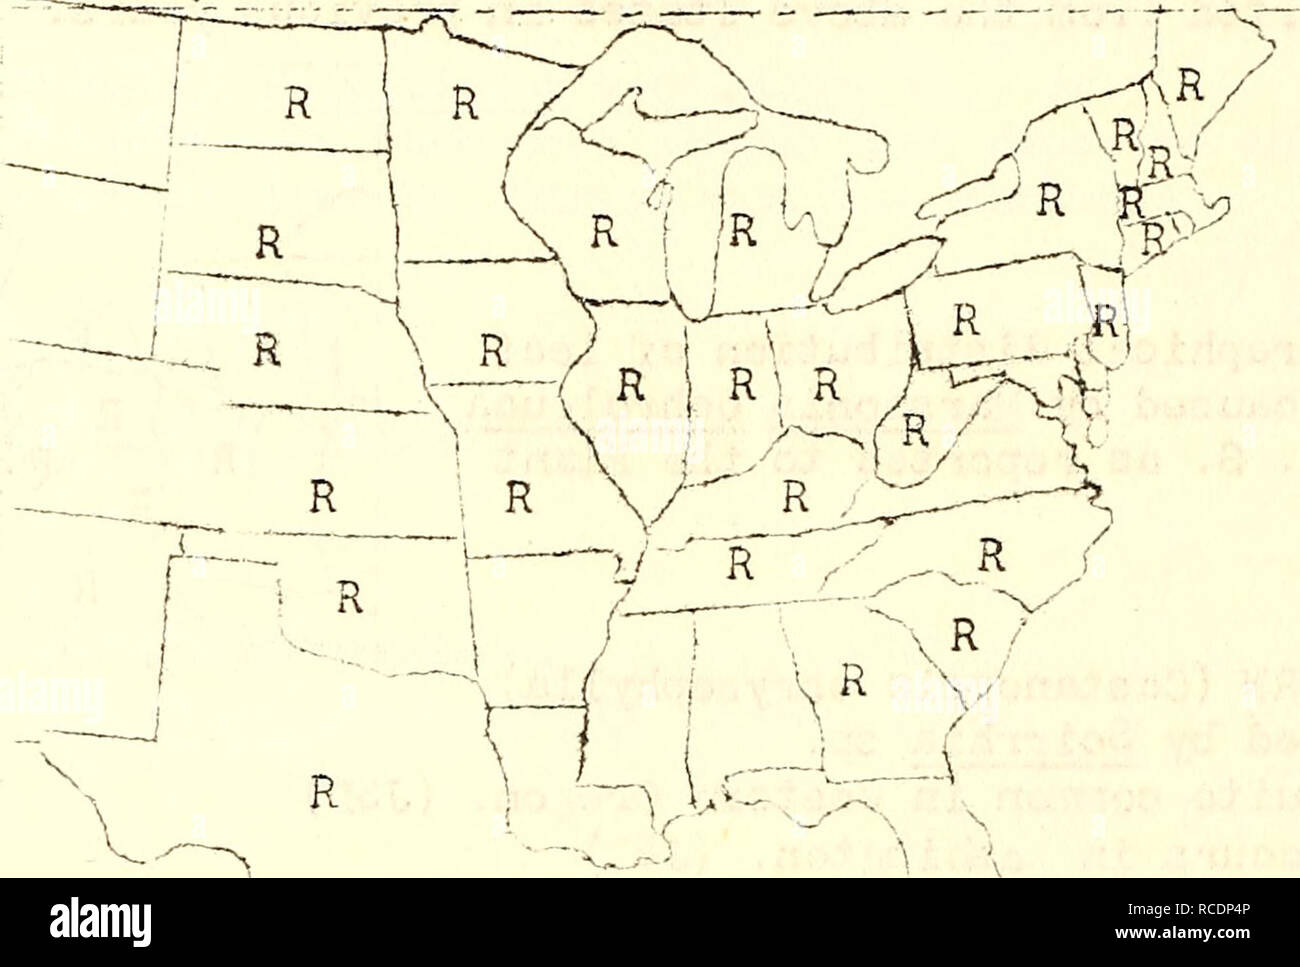 . Diseases of forest and shade trees, ornamental and miscellaneous plants in the United States in 1921. Trees Diseases and pests United States; Plants, Ornamental Diseases and pests United States. EIIi (Ulmus spp.) Anthracnose caused &quot;by Gnomonia ulmea (Schv/,) Ihum. Vi^^'f Hampshire Connecticut - more prevalent than during average year. South Carolina Texas - trace, unimportant. Ohio - greatest damage during nidsxanmer 7hen host is in full foliage moisture and temperature favorable to disease during season. Indiana - found over state, moderate amount of damage noticed in a nursery. (HET Stock Photo